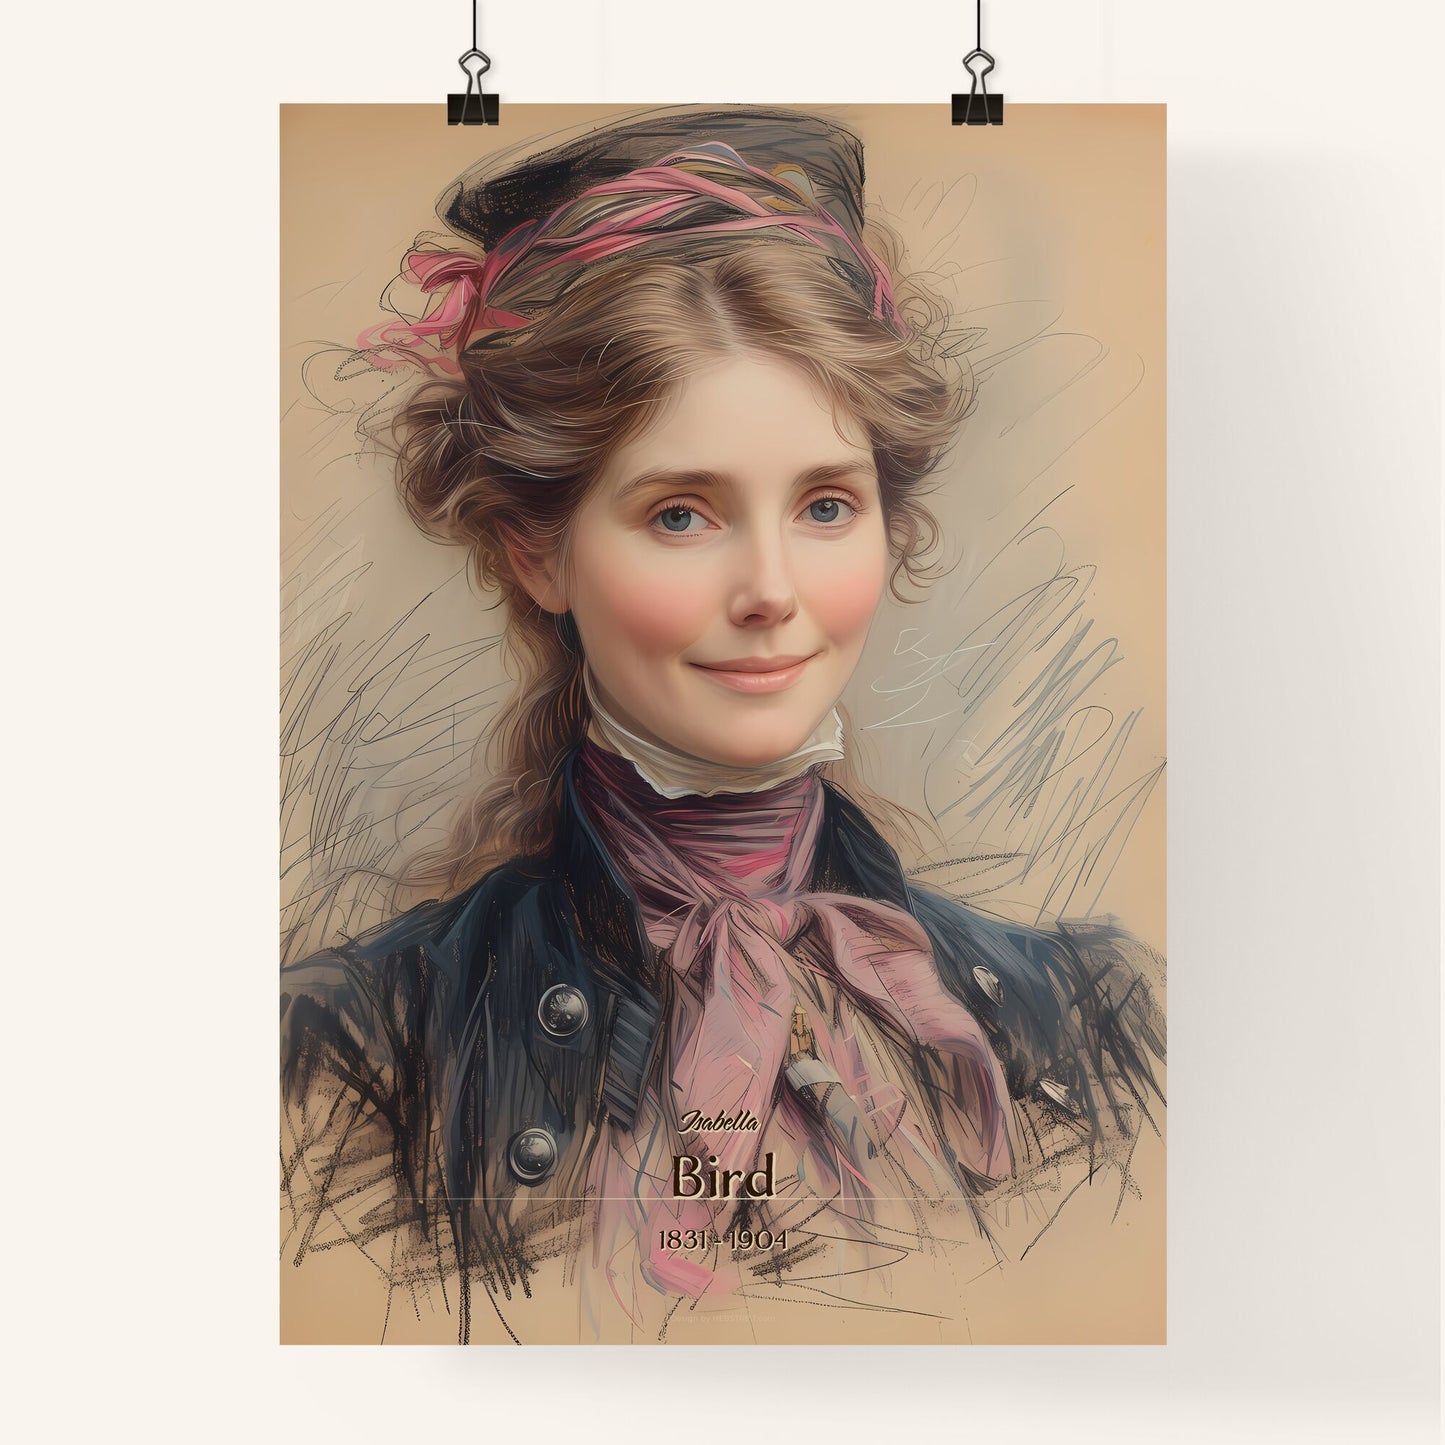 Isabella, Bird, 1831 - 1904, A Poster of a woman with a pink bow in her hair Default Title